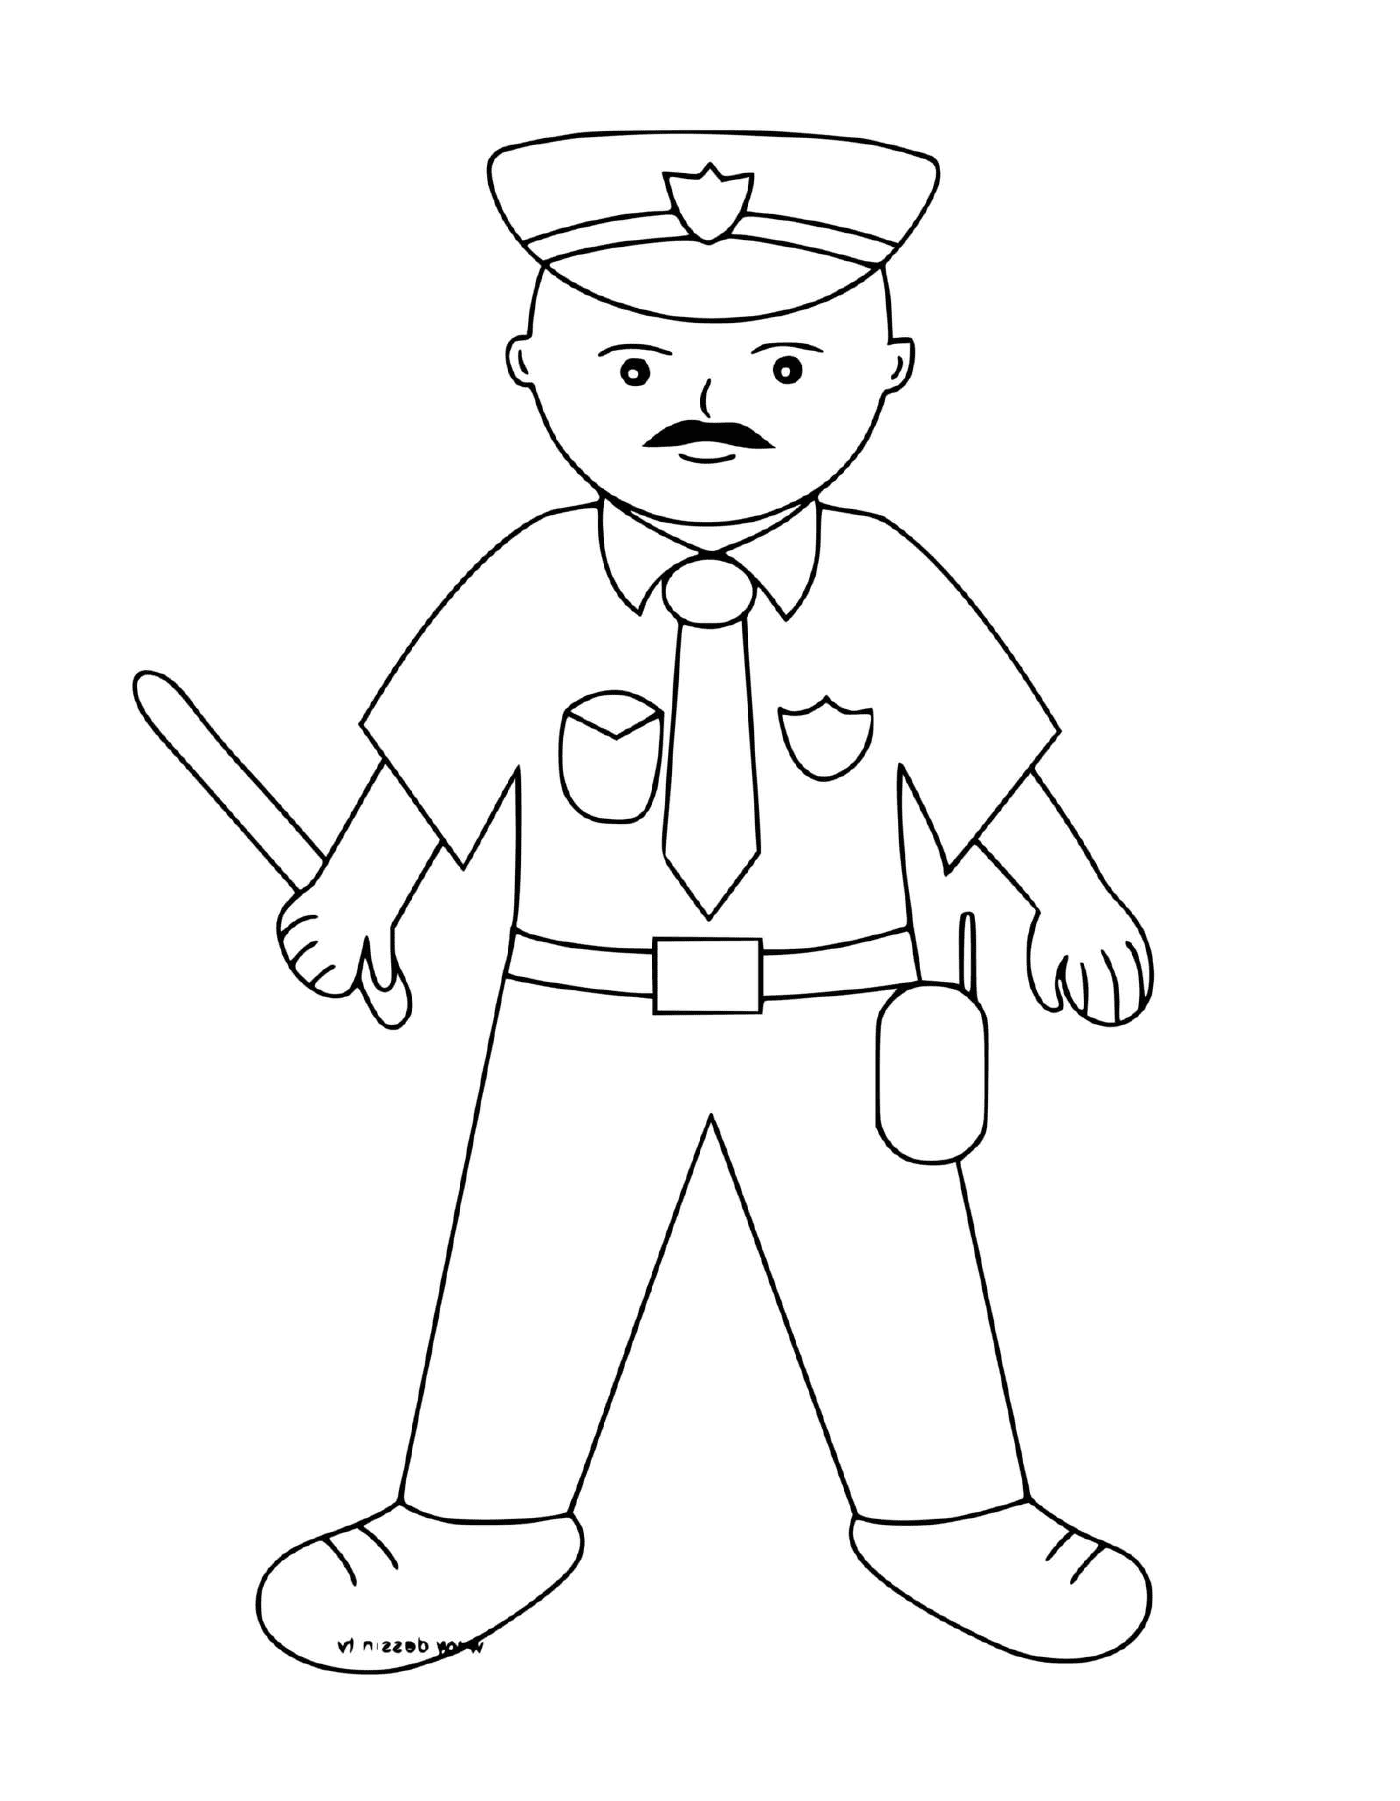  Policeman with truncheon in hand 